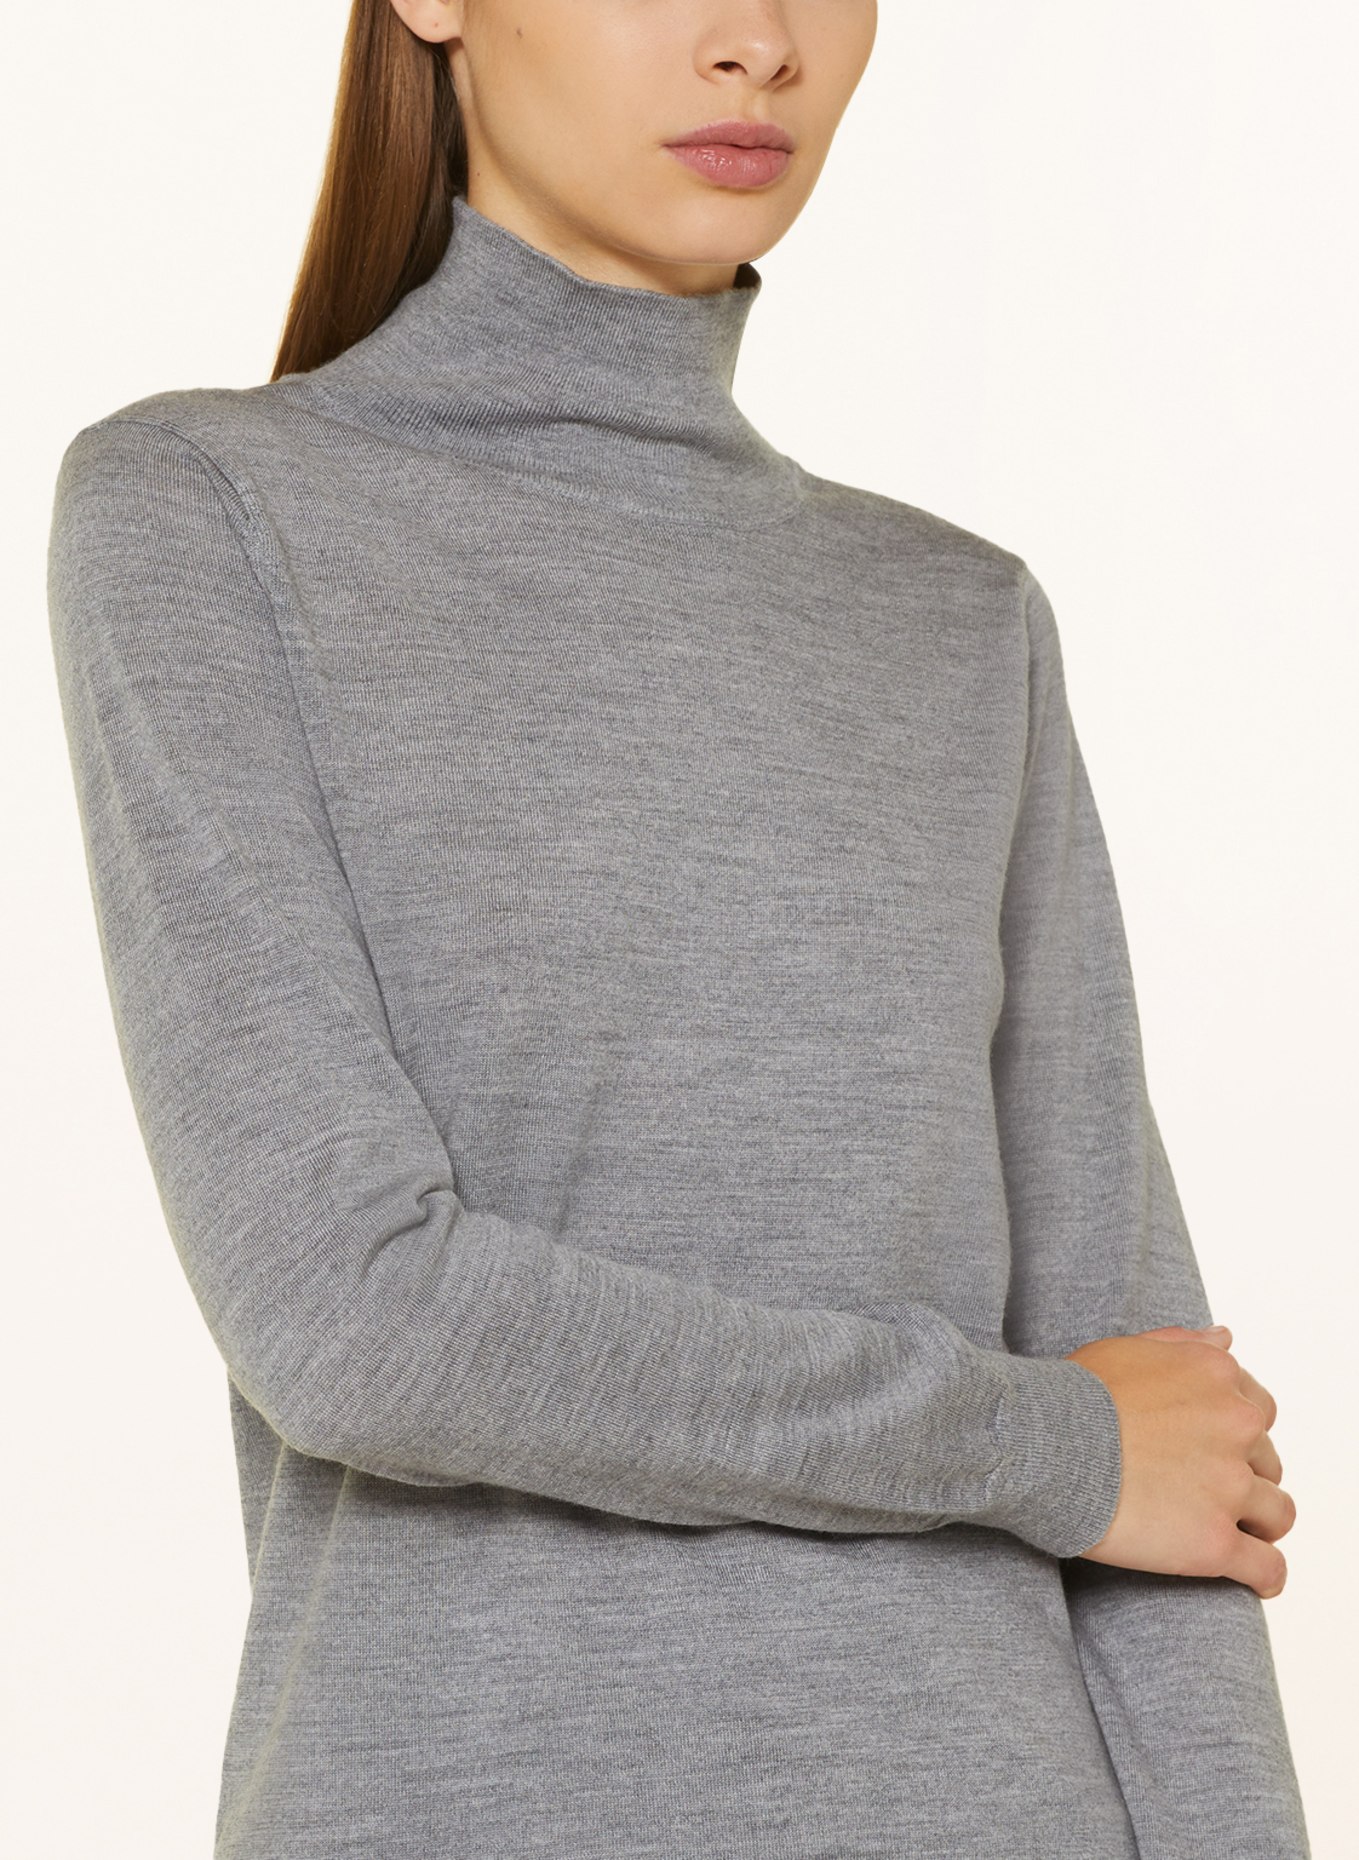 MRS & HUGS Sweater, Color: GRAY (Image 4)